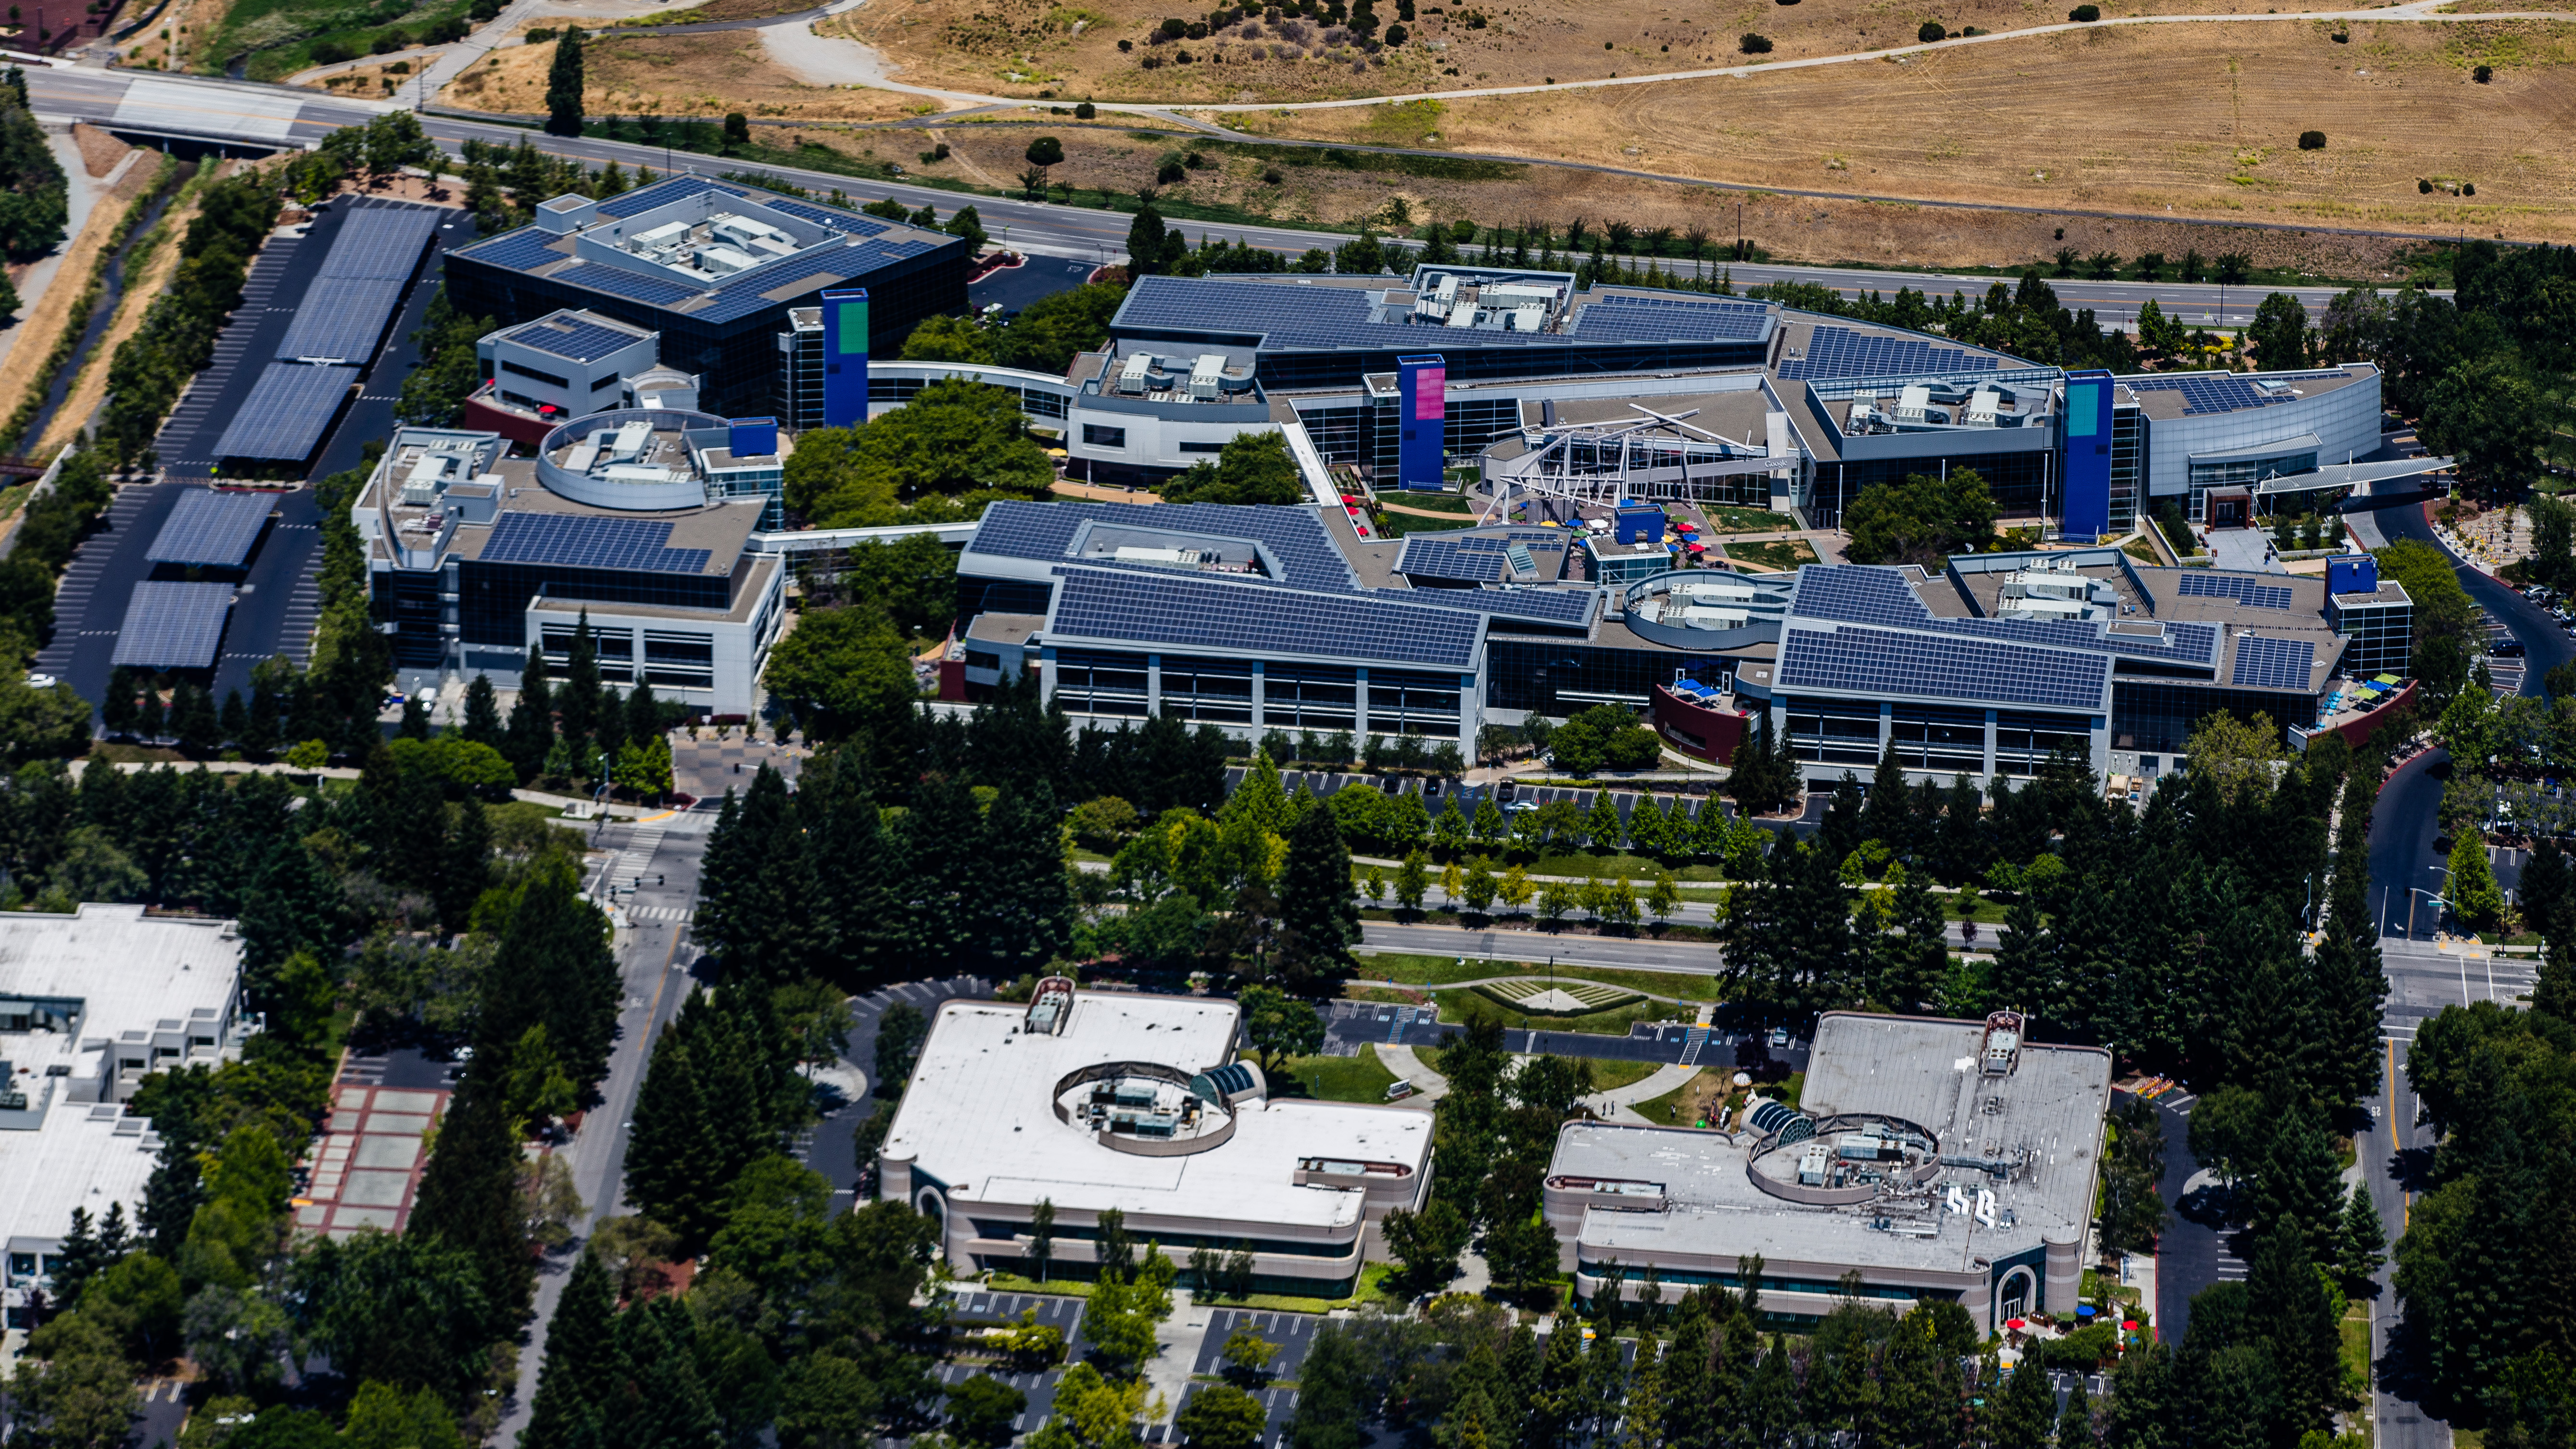 File:Google Campus, Mountain View, CA.jpg - Wikimedia Commons